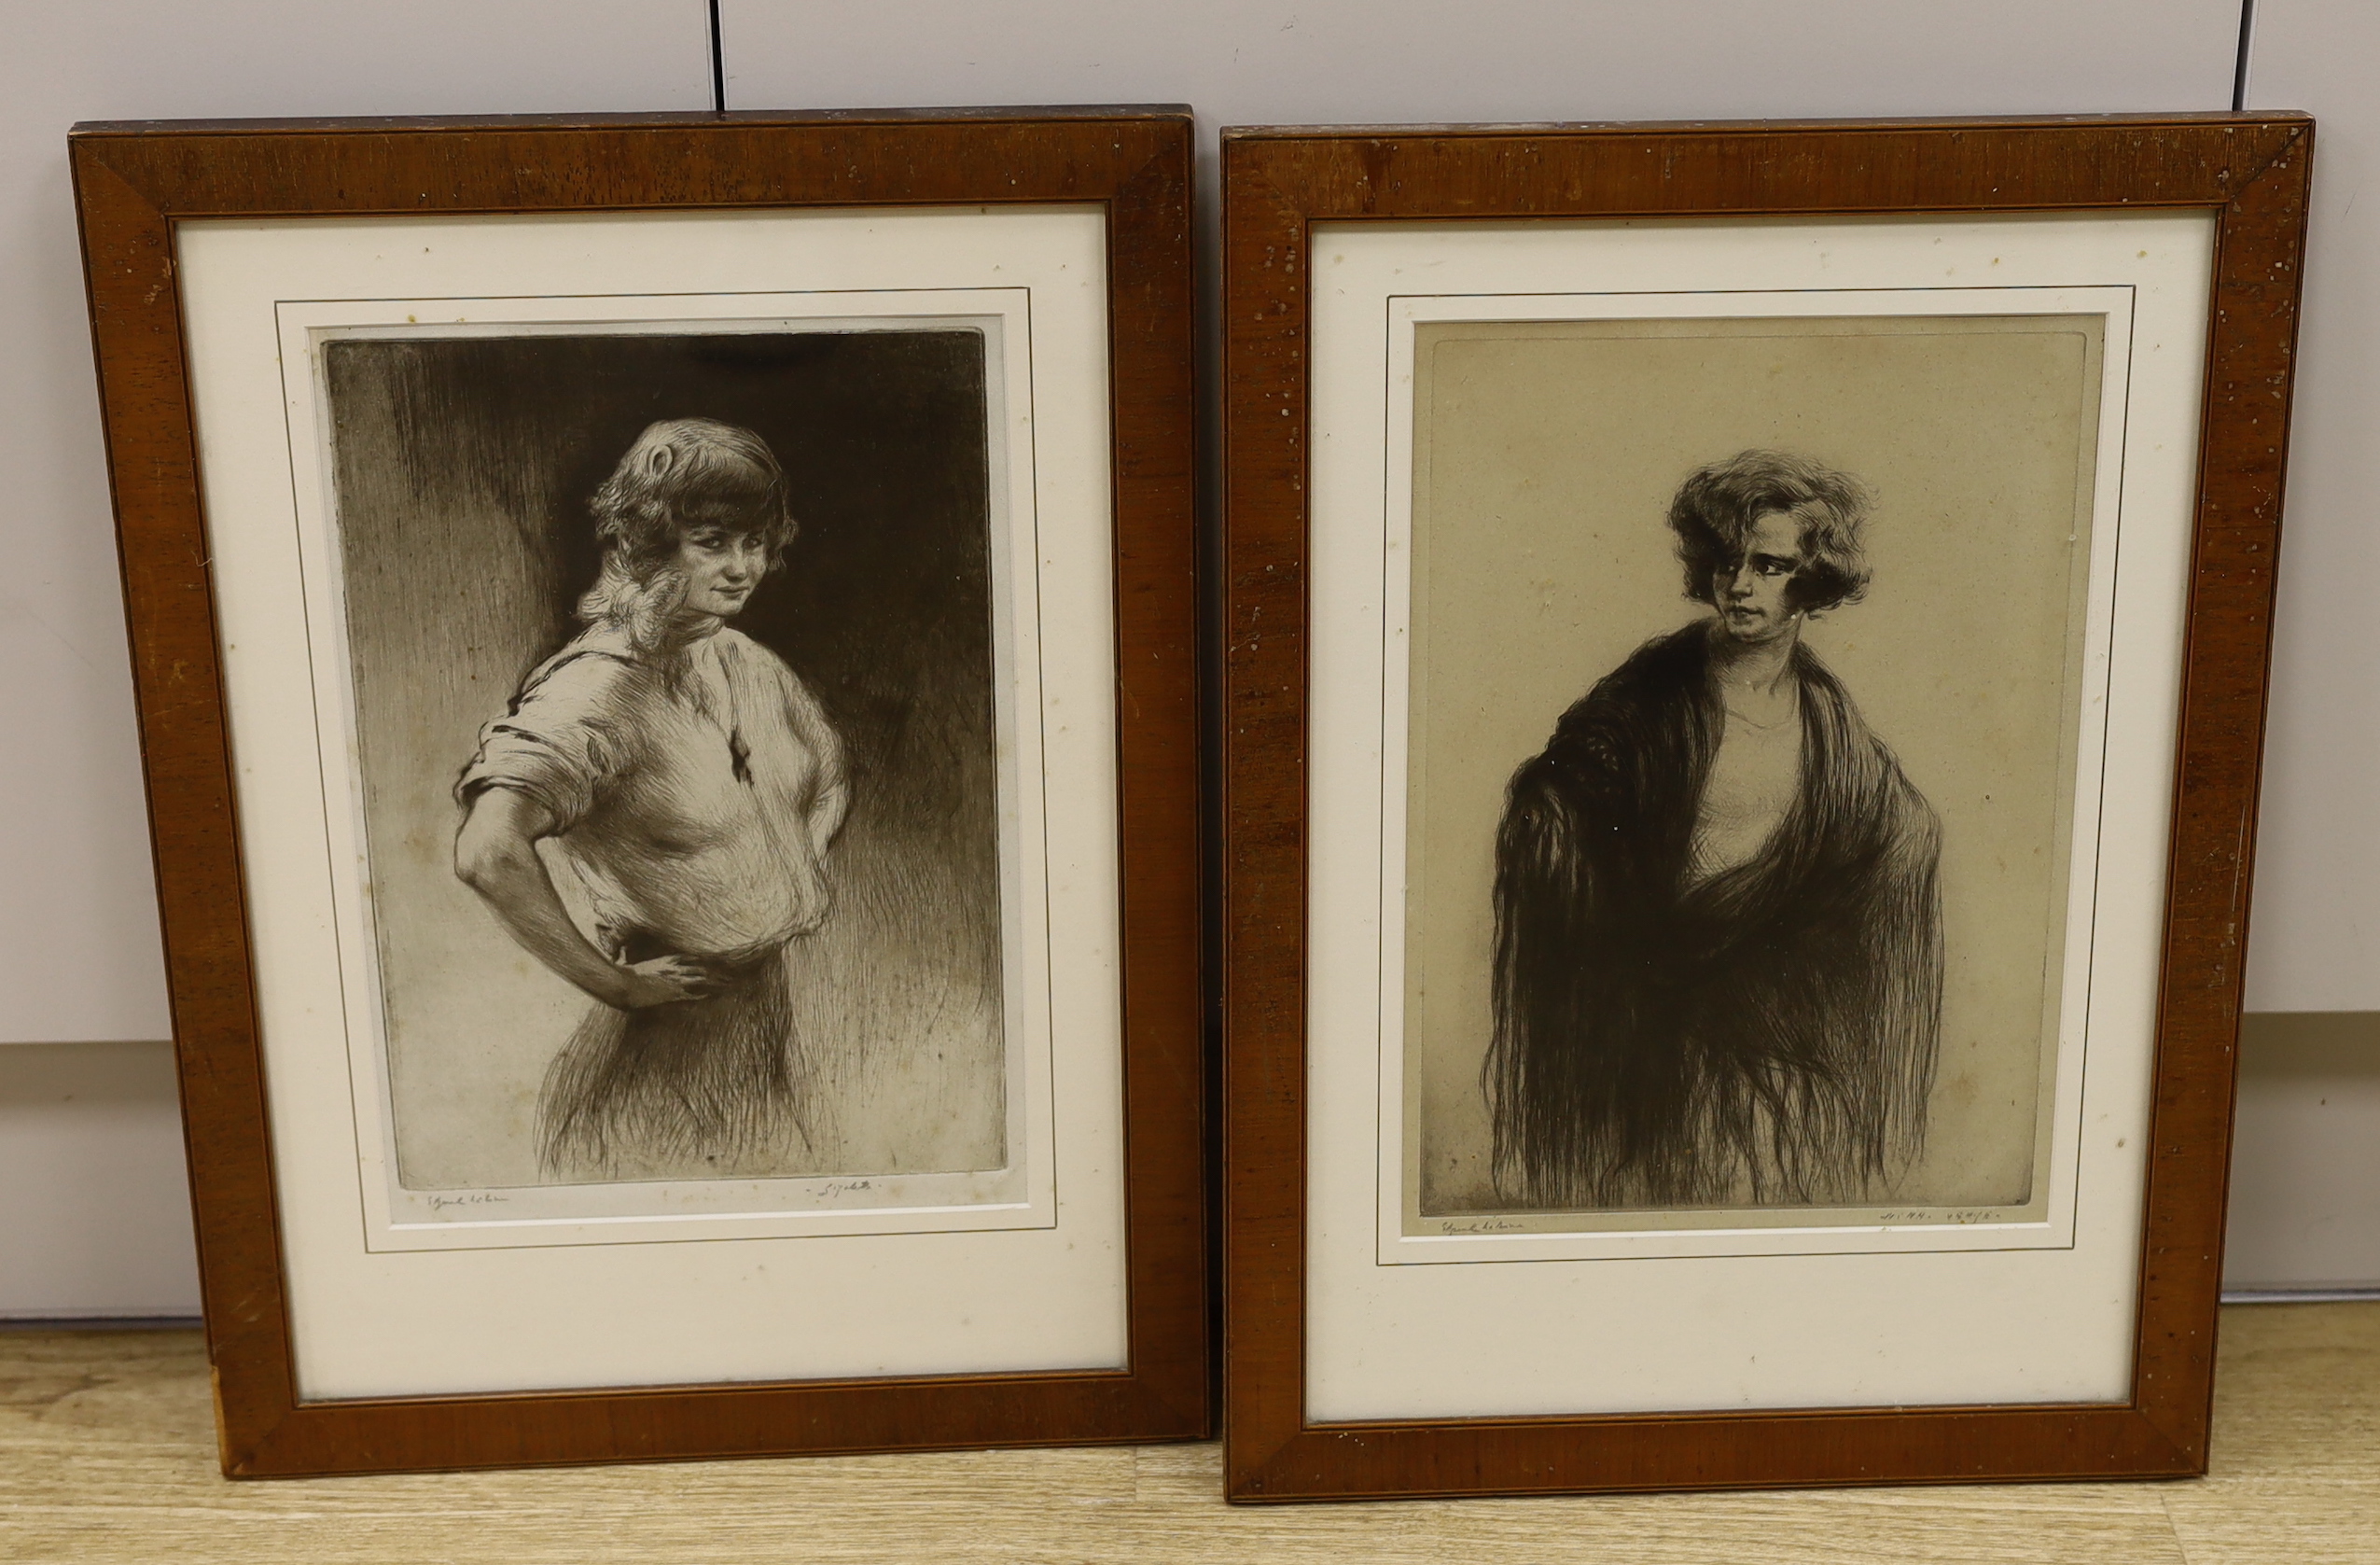 Edgar Chahine (French, 1874-1947), two etchings, 'Gigolette' and 'Nina, Venise', each signed in pencil, largest 33 x 23cm